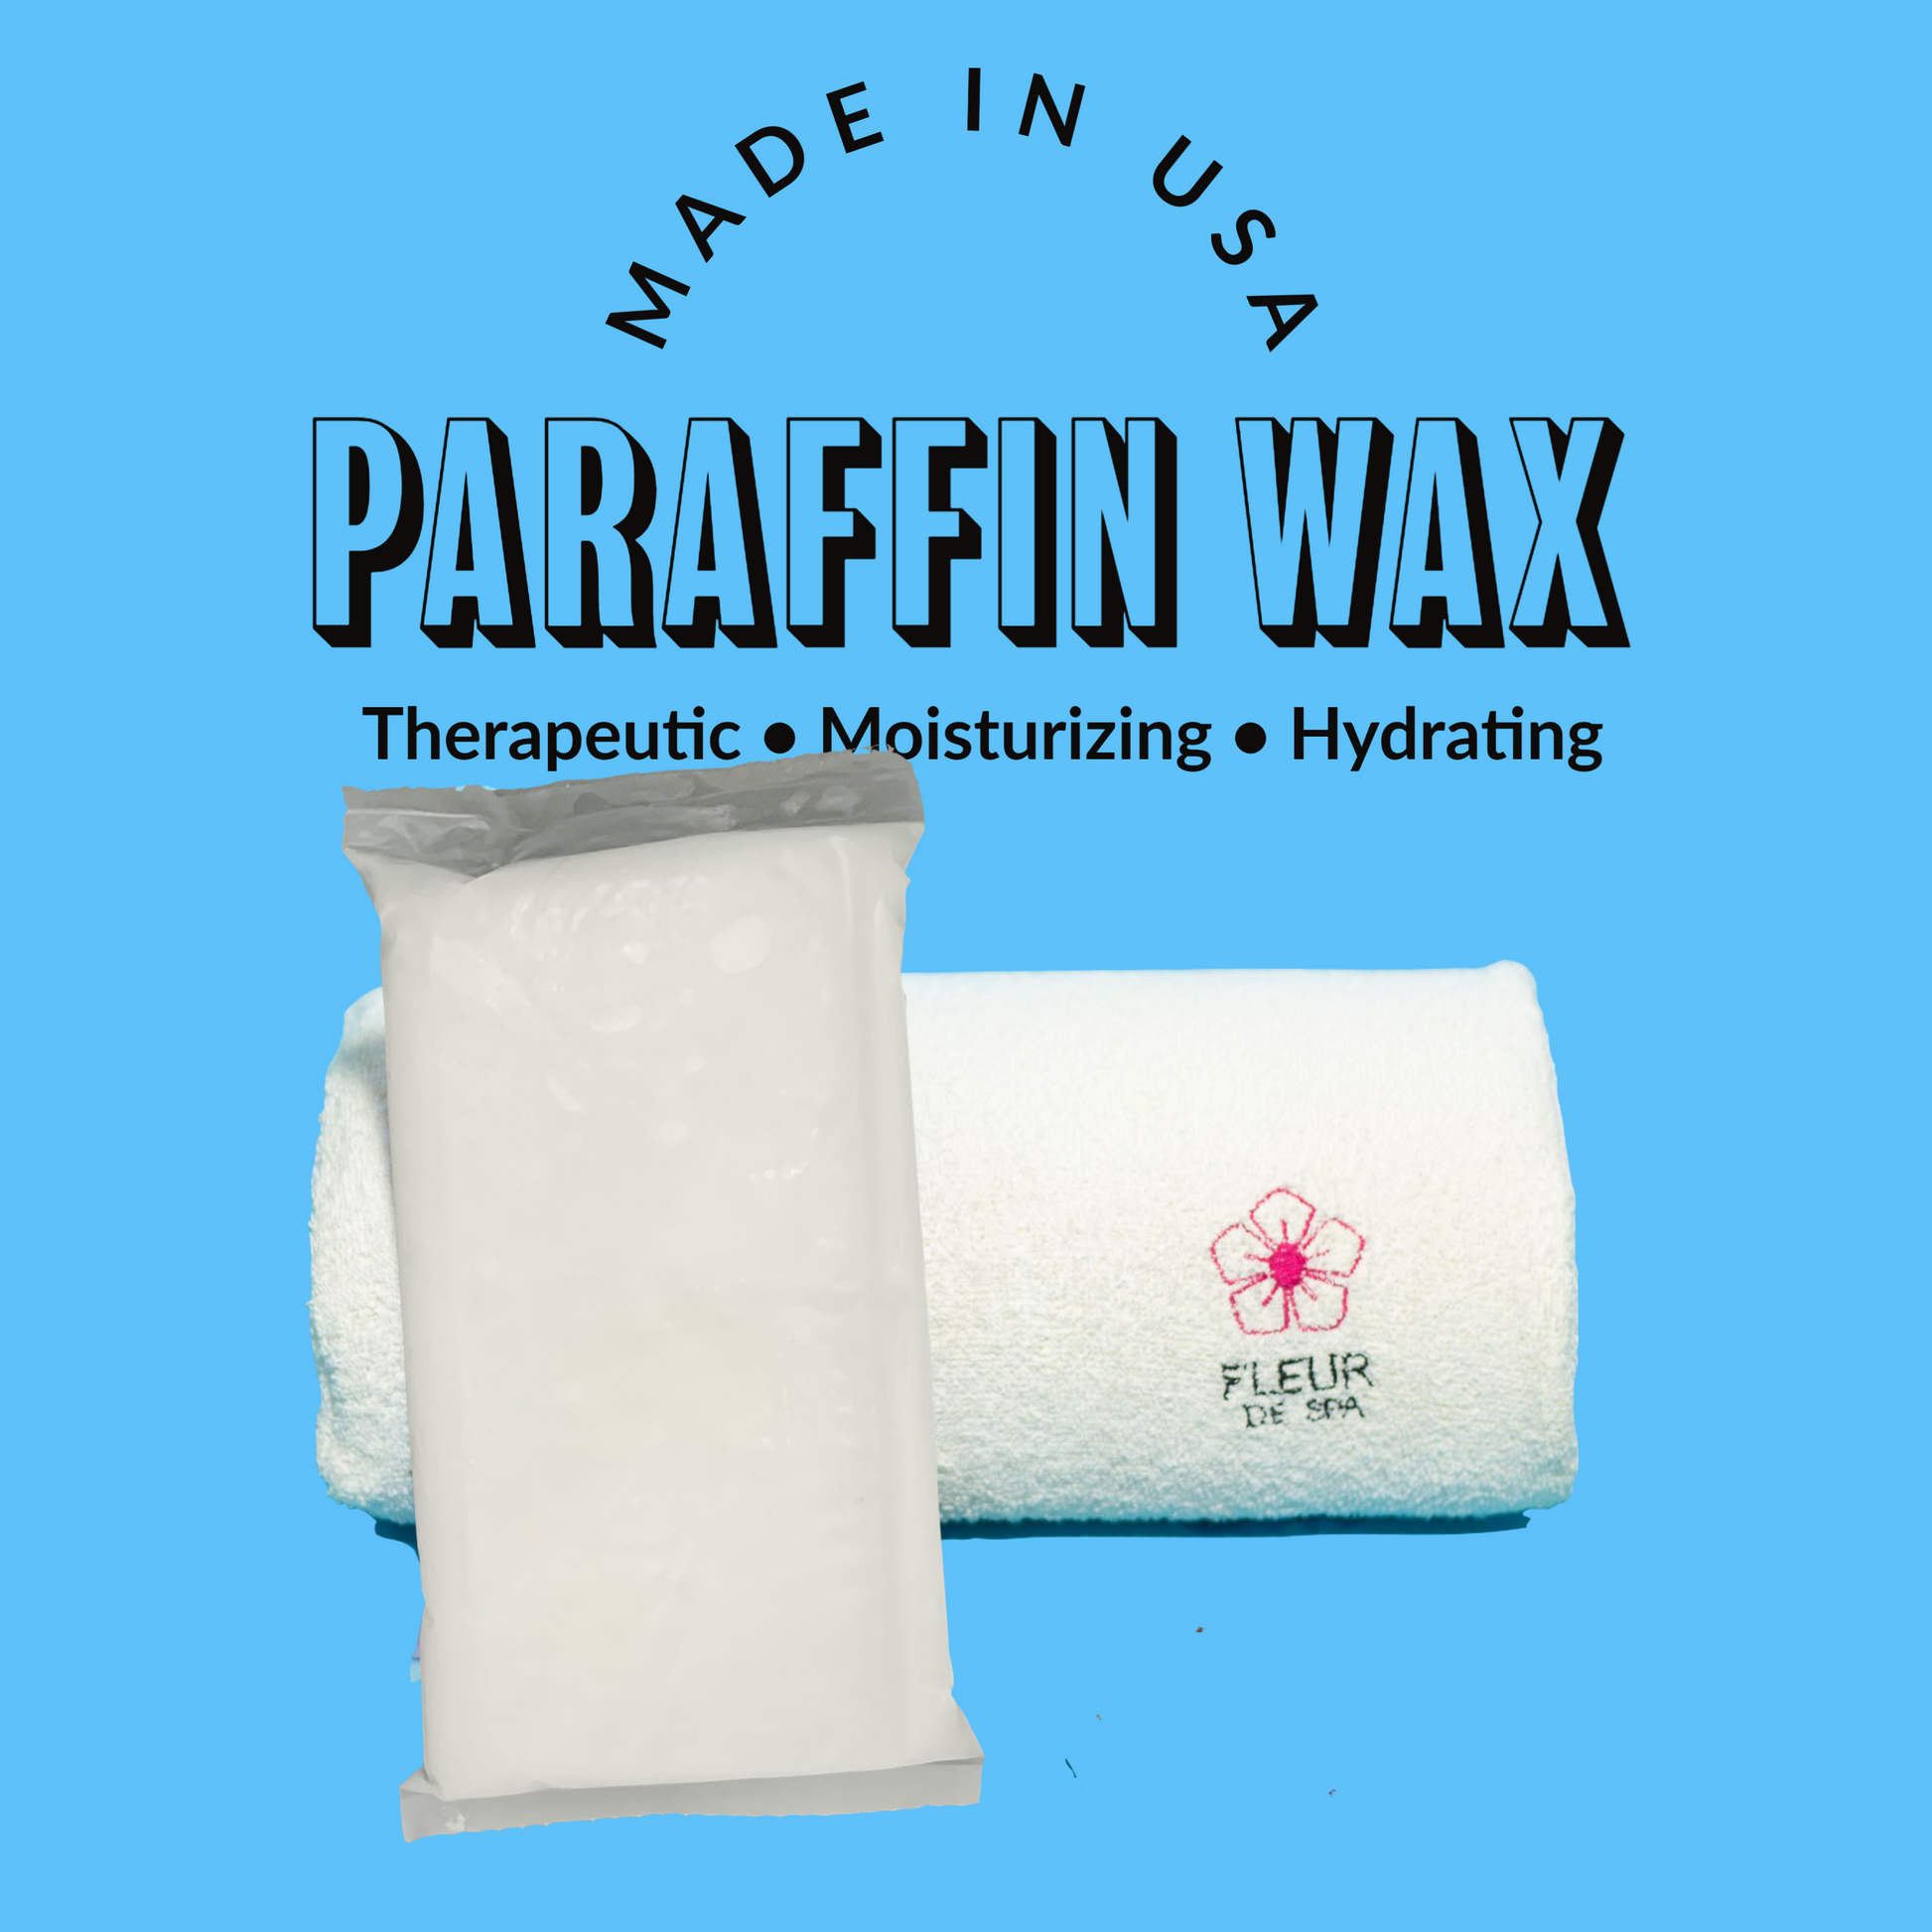 Paraffin wax refill for paraffin wax warmer machine parafin is a therapeutic heat therapy for hands and feet peach lavender coconut paraffin waxes with unscented spa service moisturizing and hydrating made in the USA